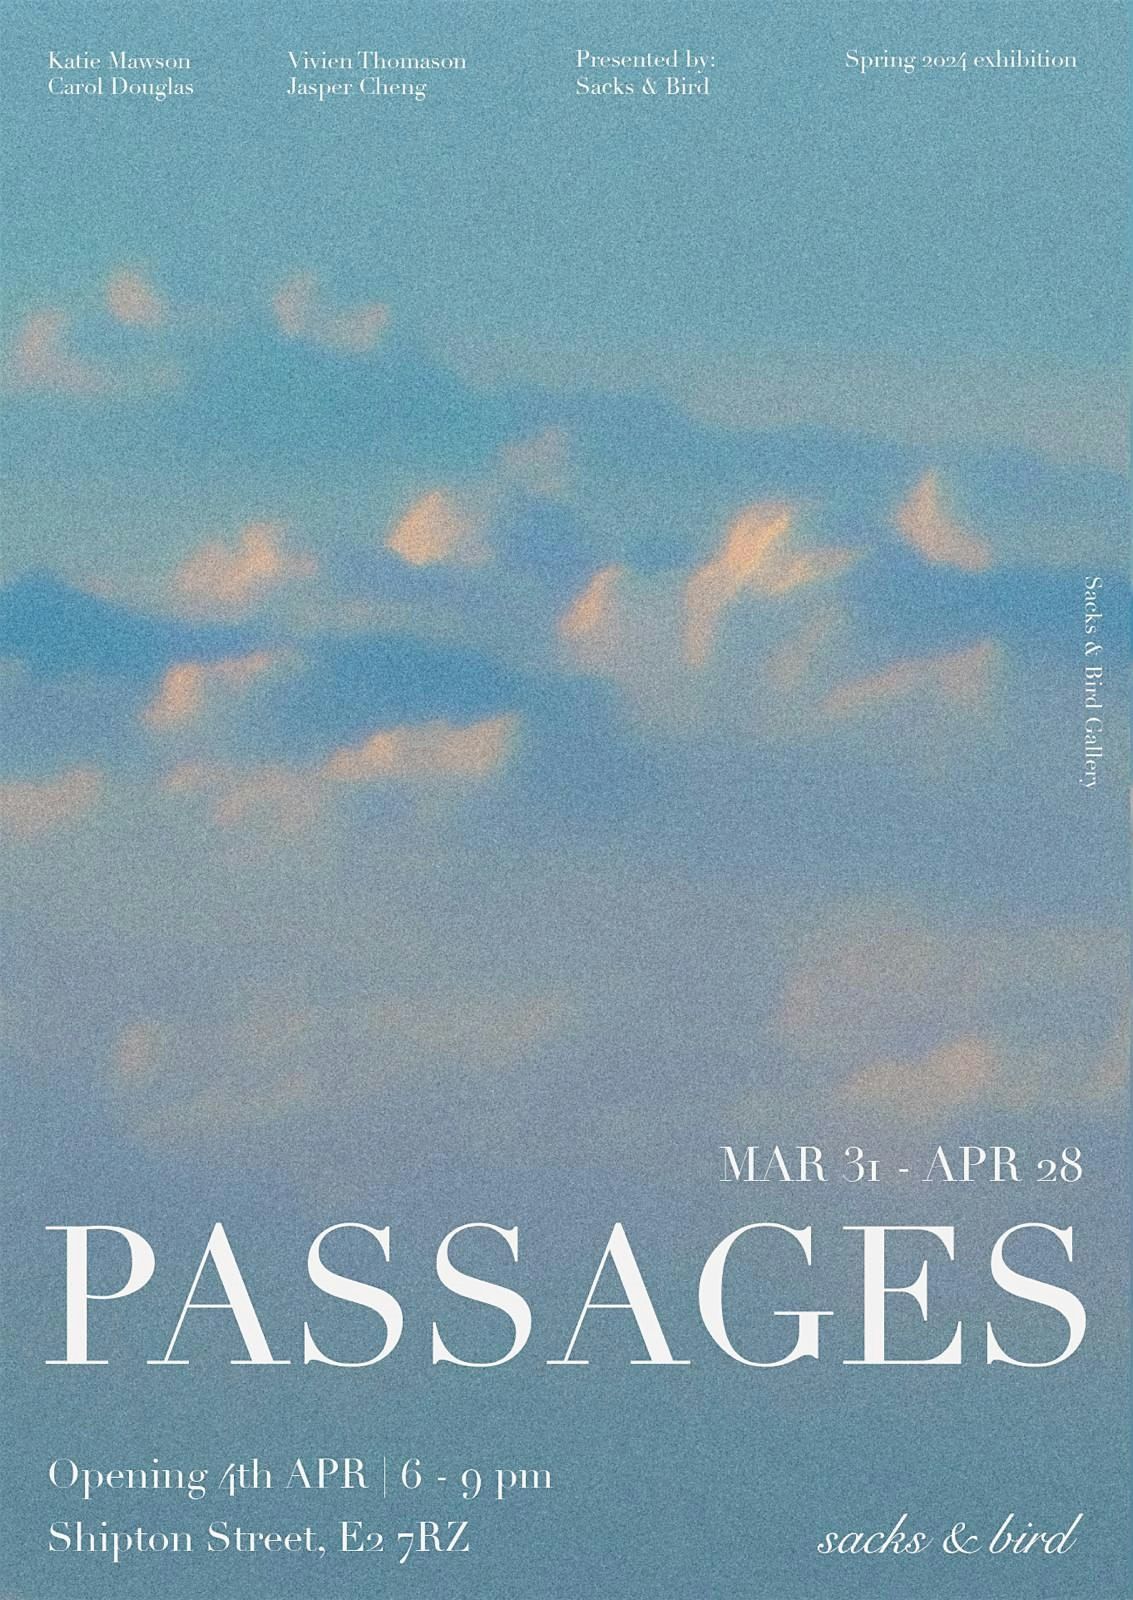 Passages: Exhibition Opening Night